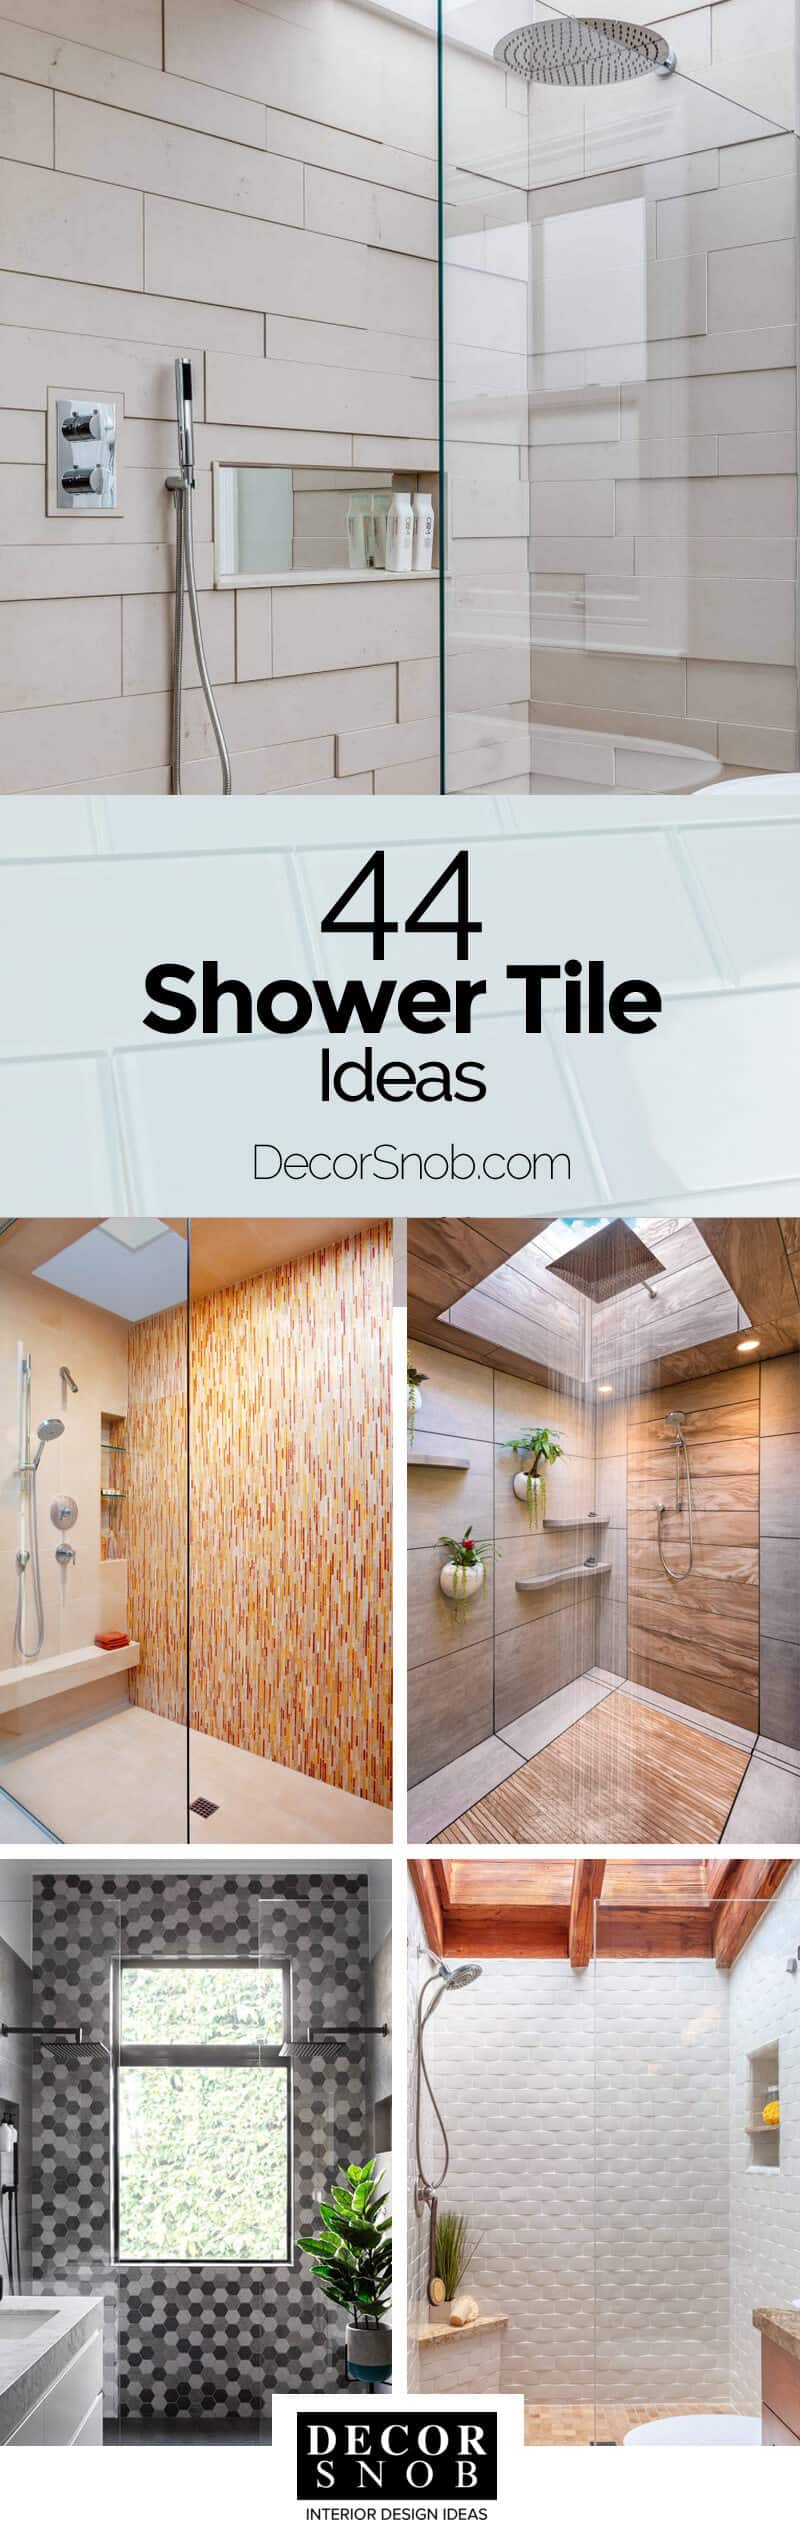 44 Modern Shower Tile Ideas And Designs 2020 Edition,Casual Designer Shoes For Women